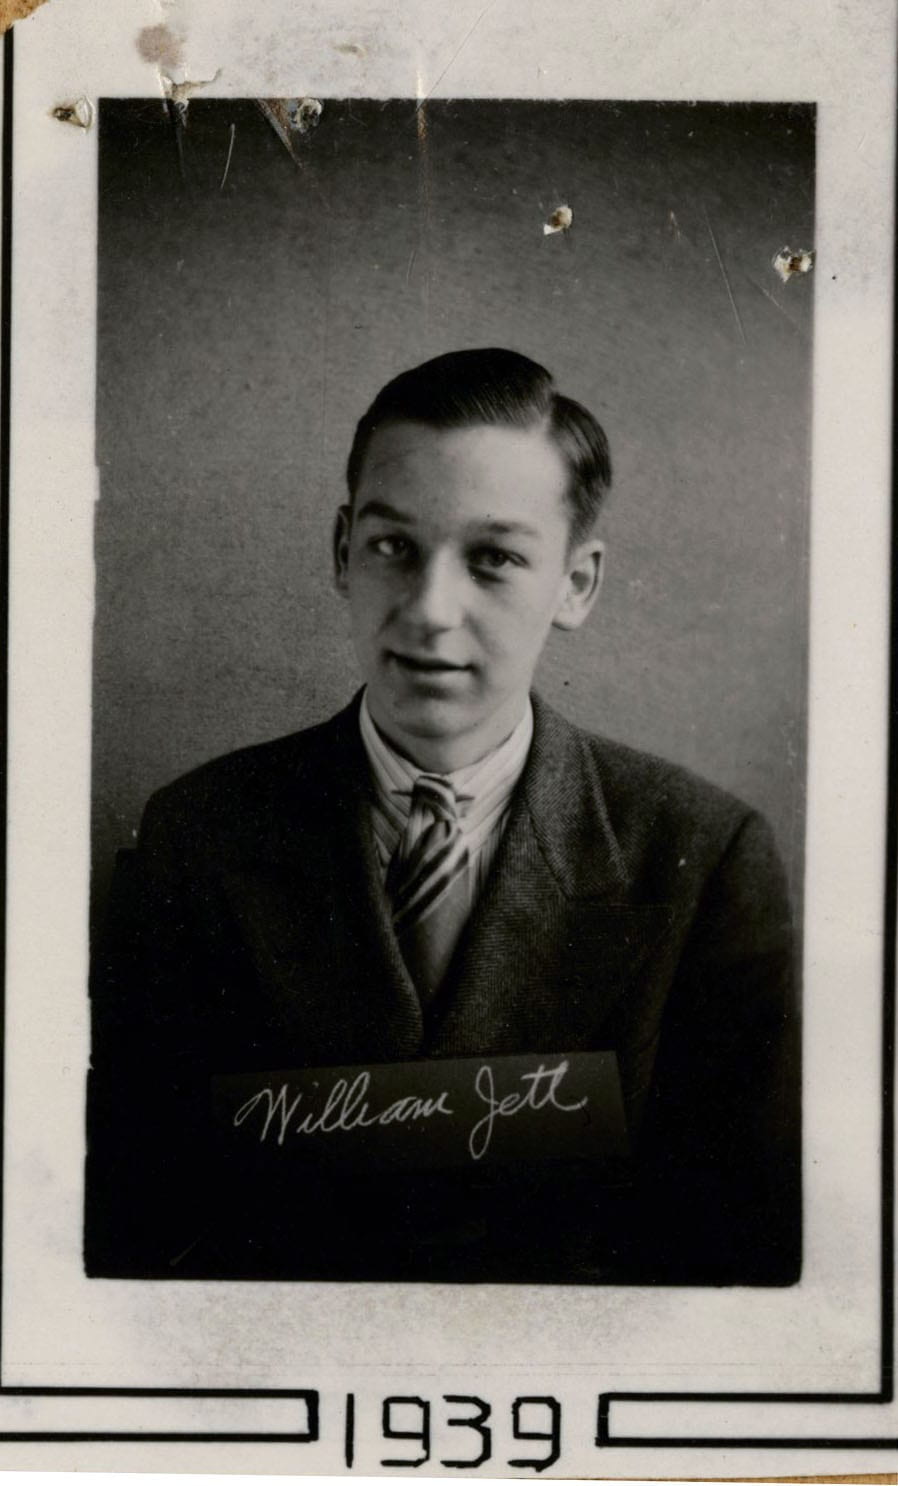 Photo of William Jett with his signature and the year 1939.